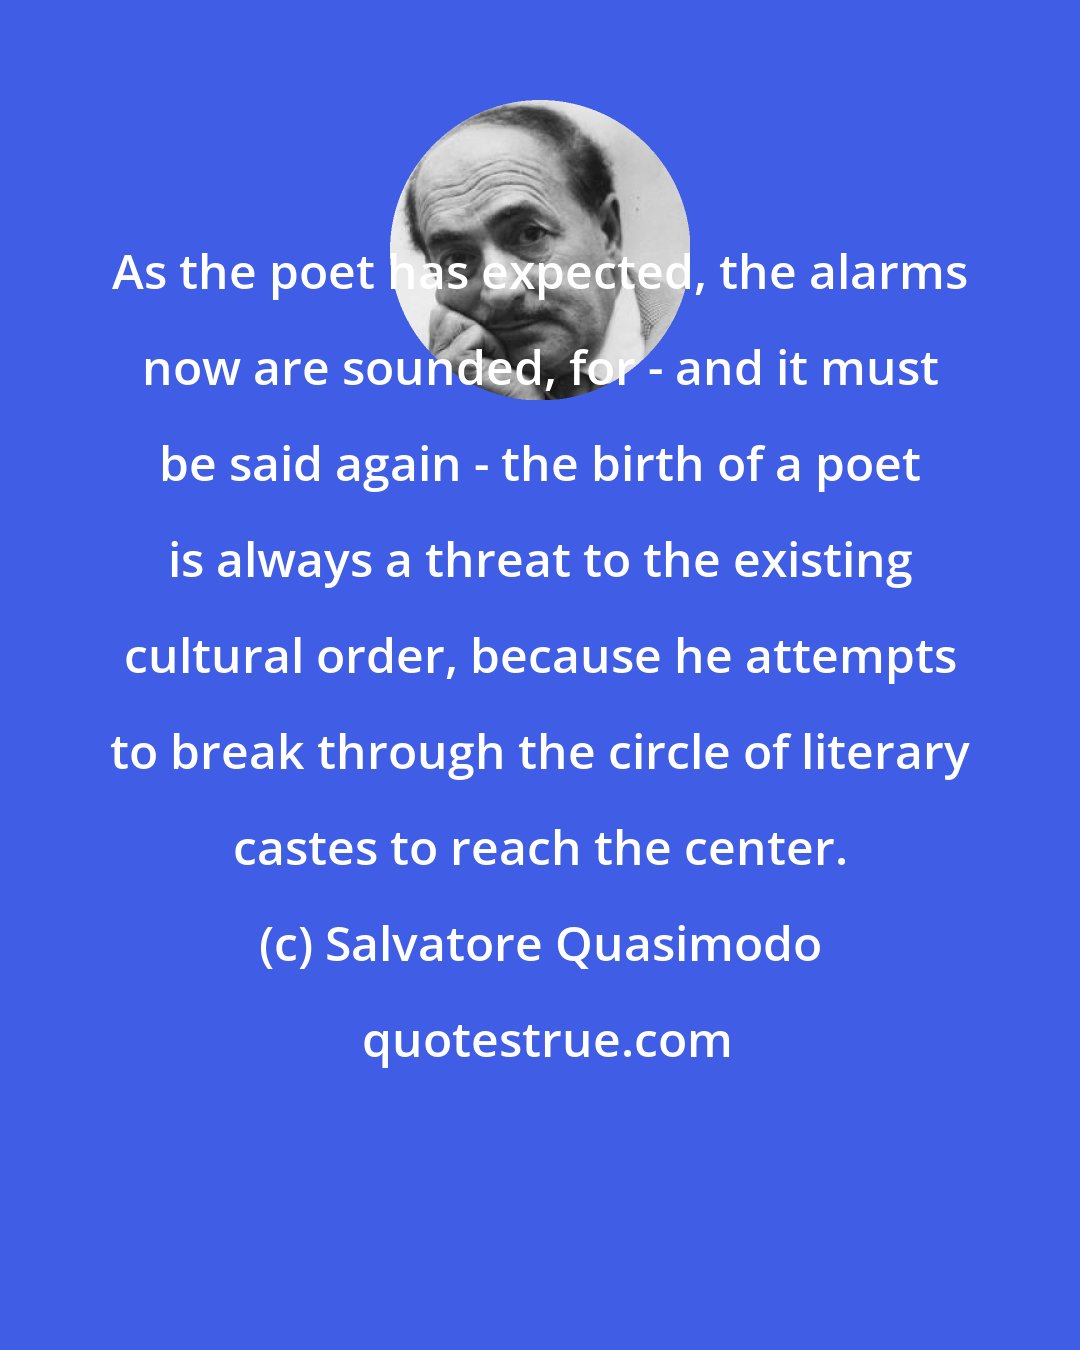 Salvatore Quasimodo: As the poet has expected, the alarms now are sounded, for - and it must be said again - the birth of a poet is always a threat to the existing cultural order, because he attempts to break through the circle of literary castes to reach the center.